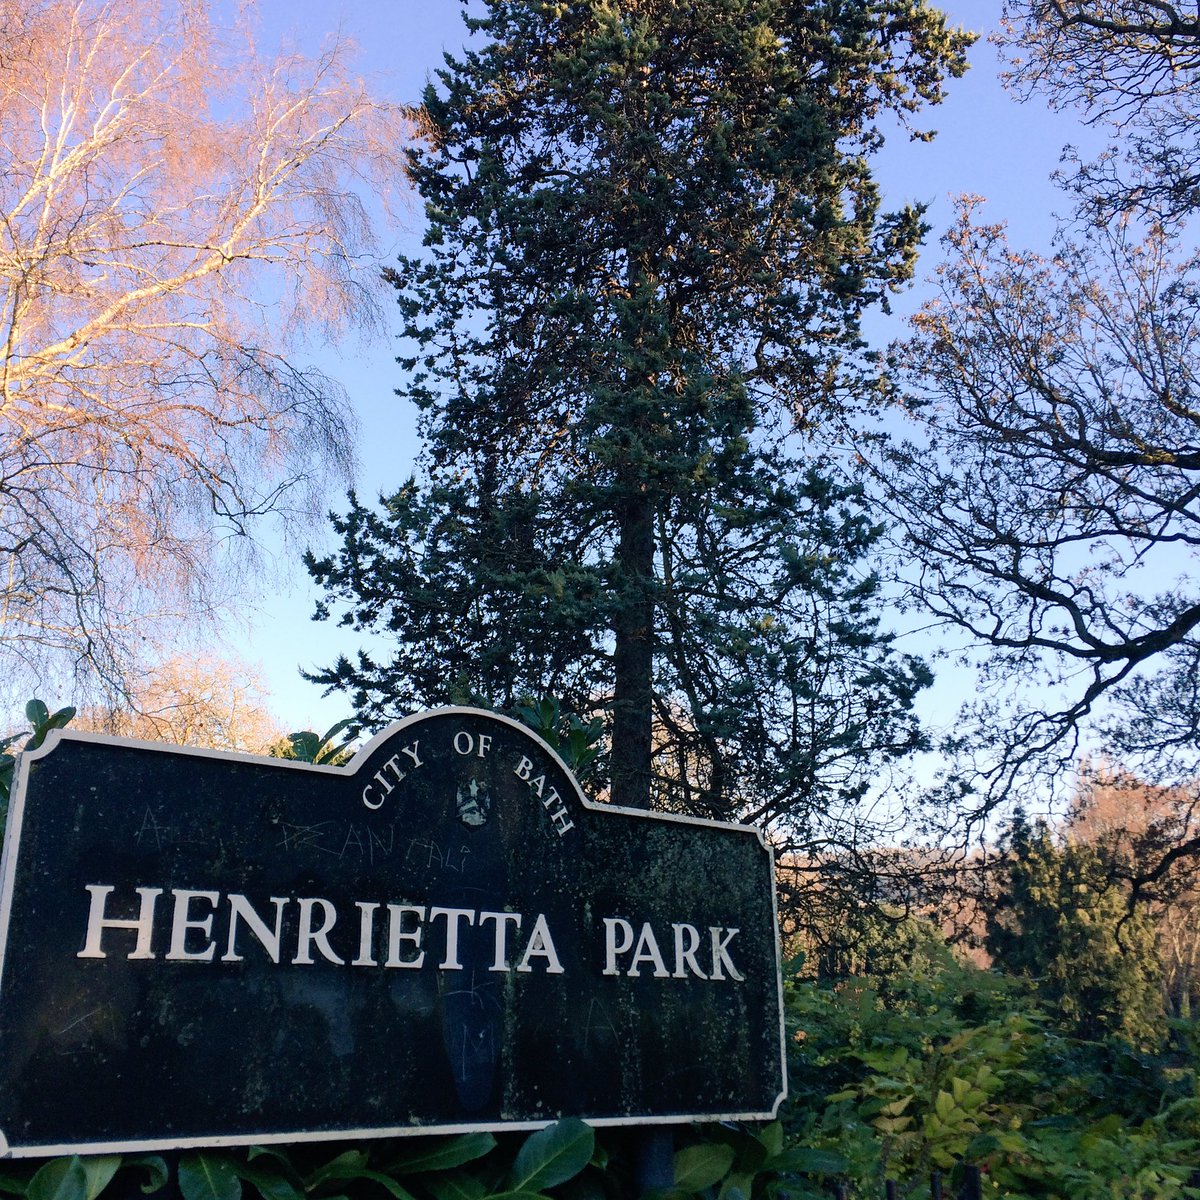 Beautiful day in #henriettapark ☀️ #neighbours #dogparadise #greenspaces #citystays